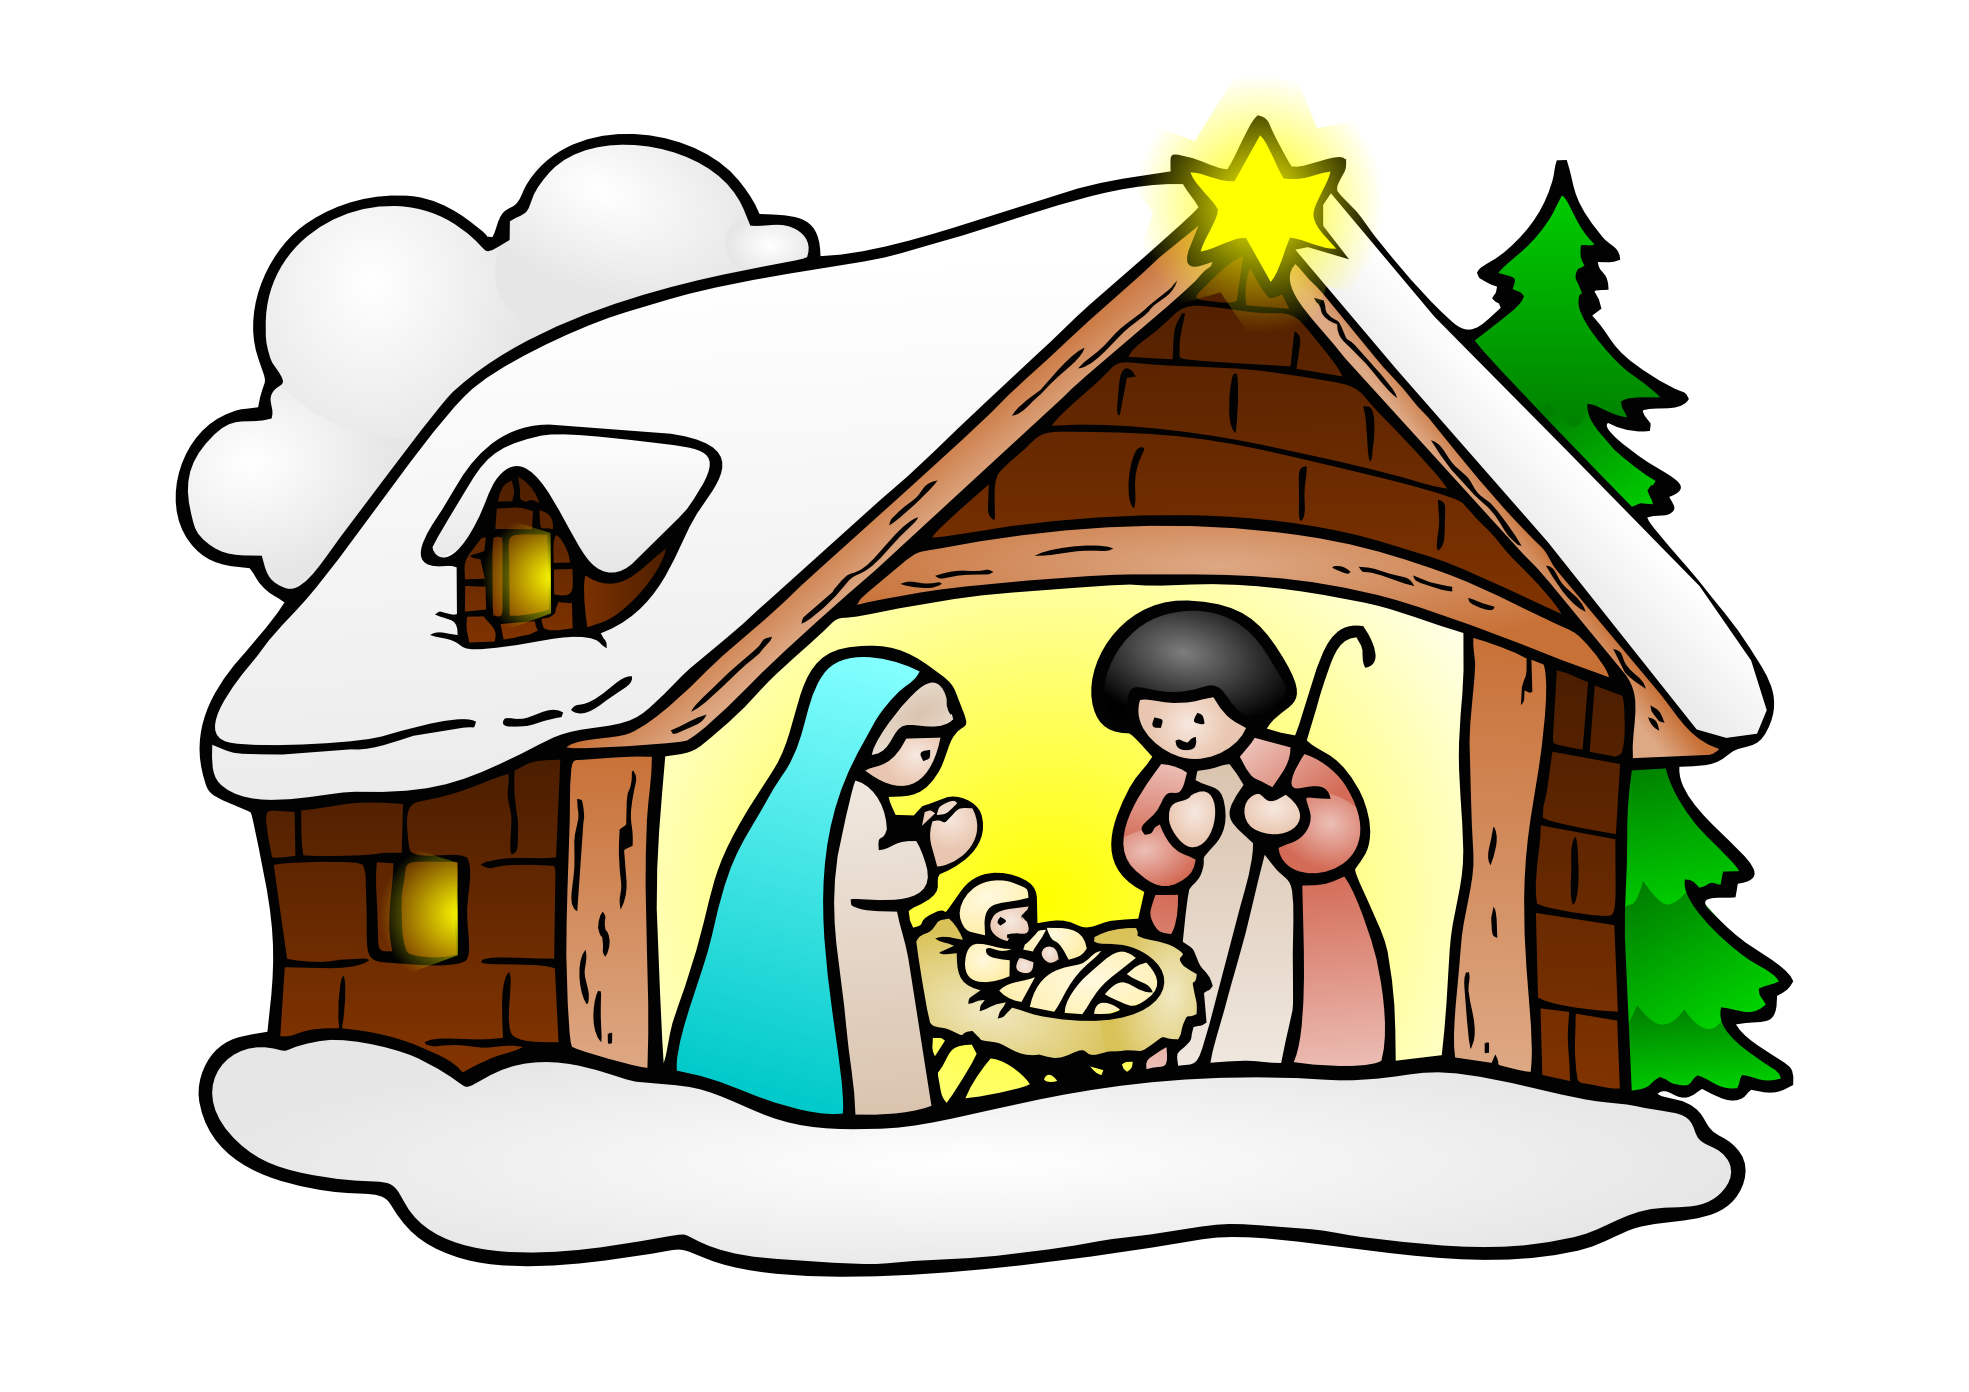 Merry Christmas Nativity Clipart   Clipart Panda   Free Clipart Images